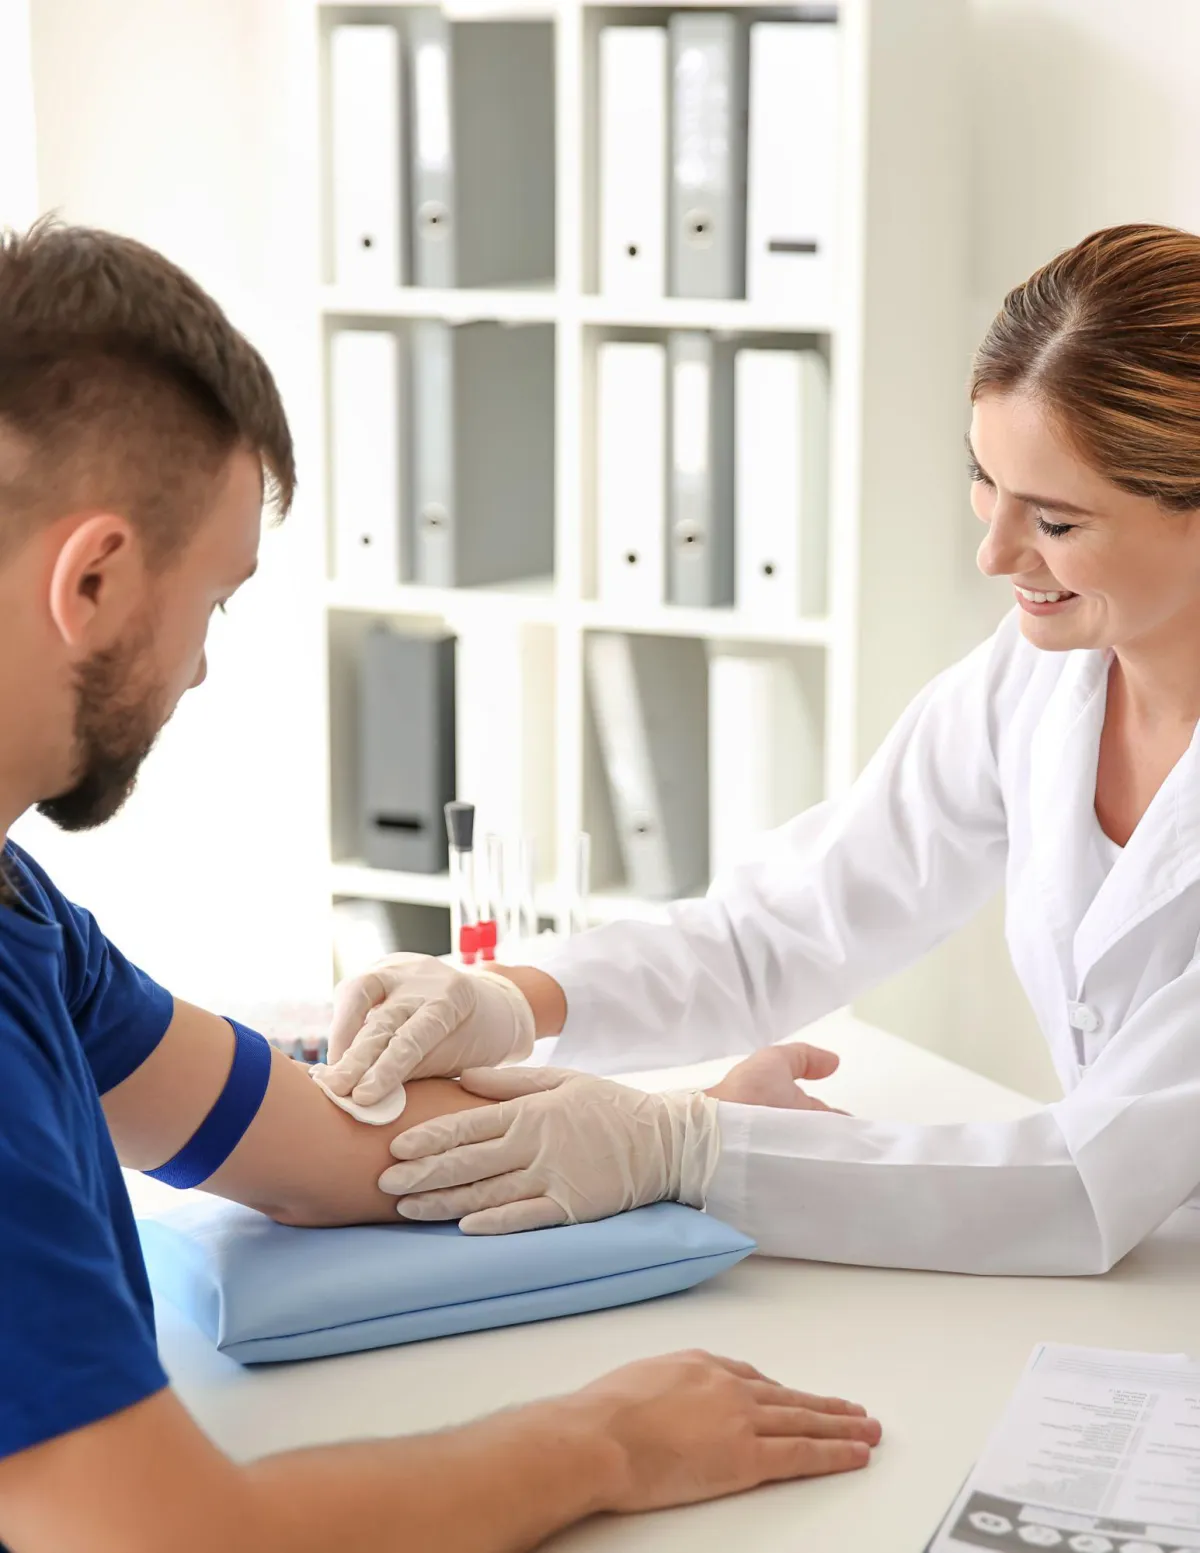 Blood Draw at Home Mobile Phlebotomy Service San Diego, California